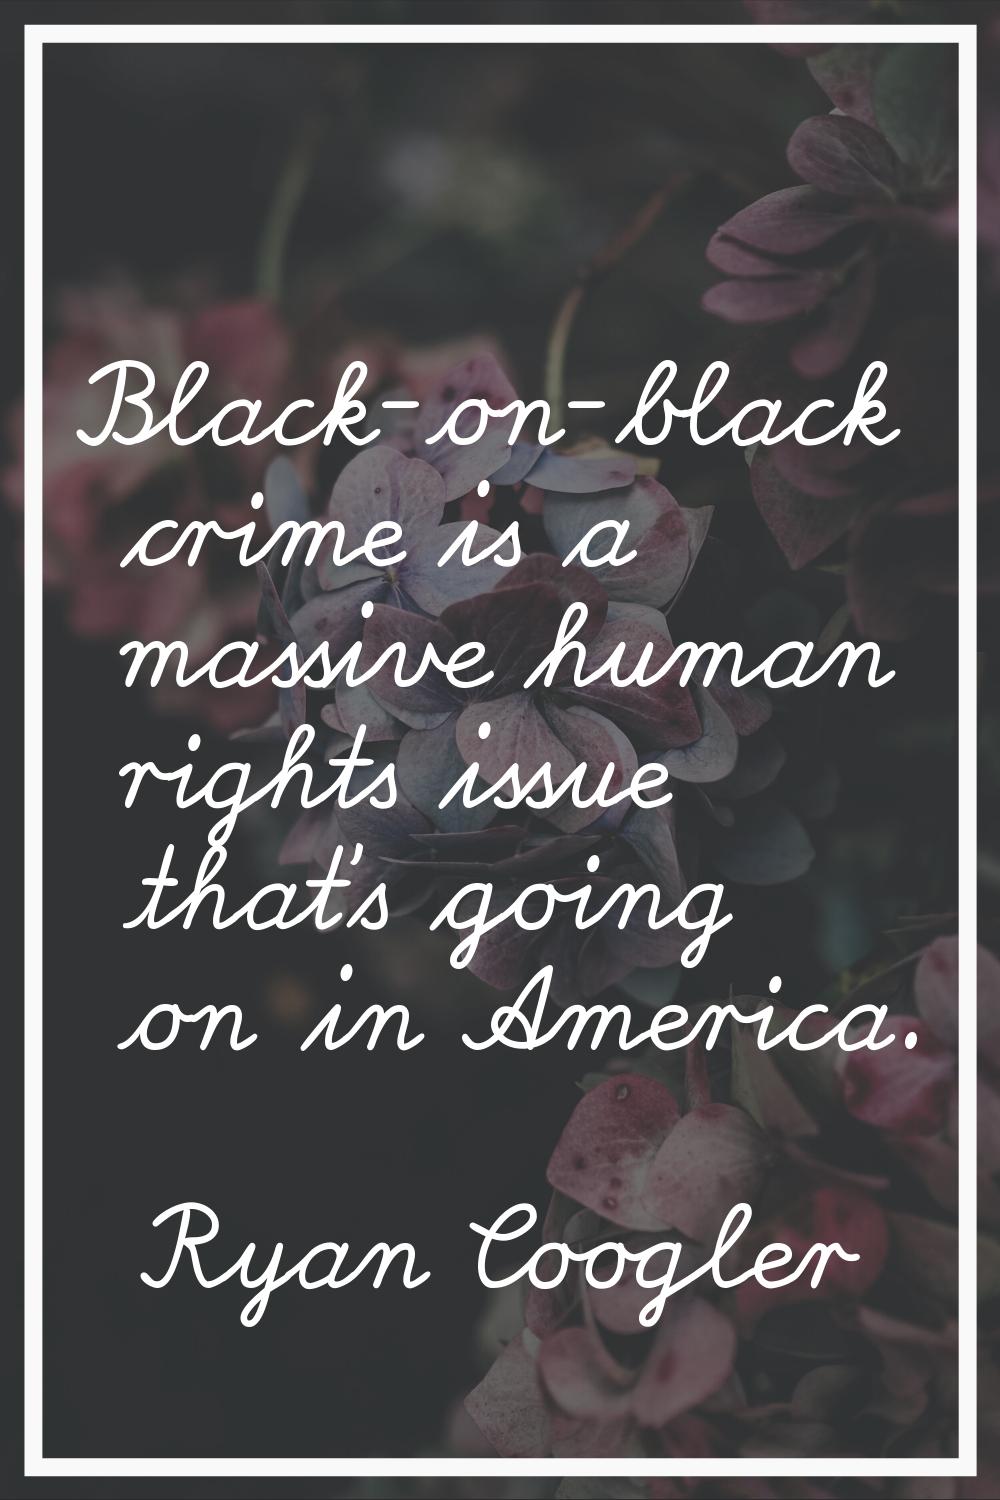 Black-on-black crime is a massive human rights issue that's going on in America.